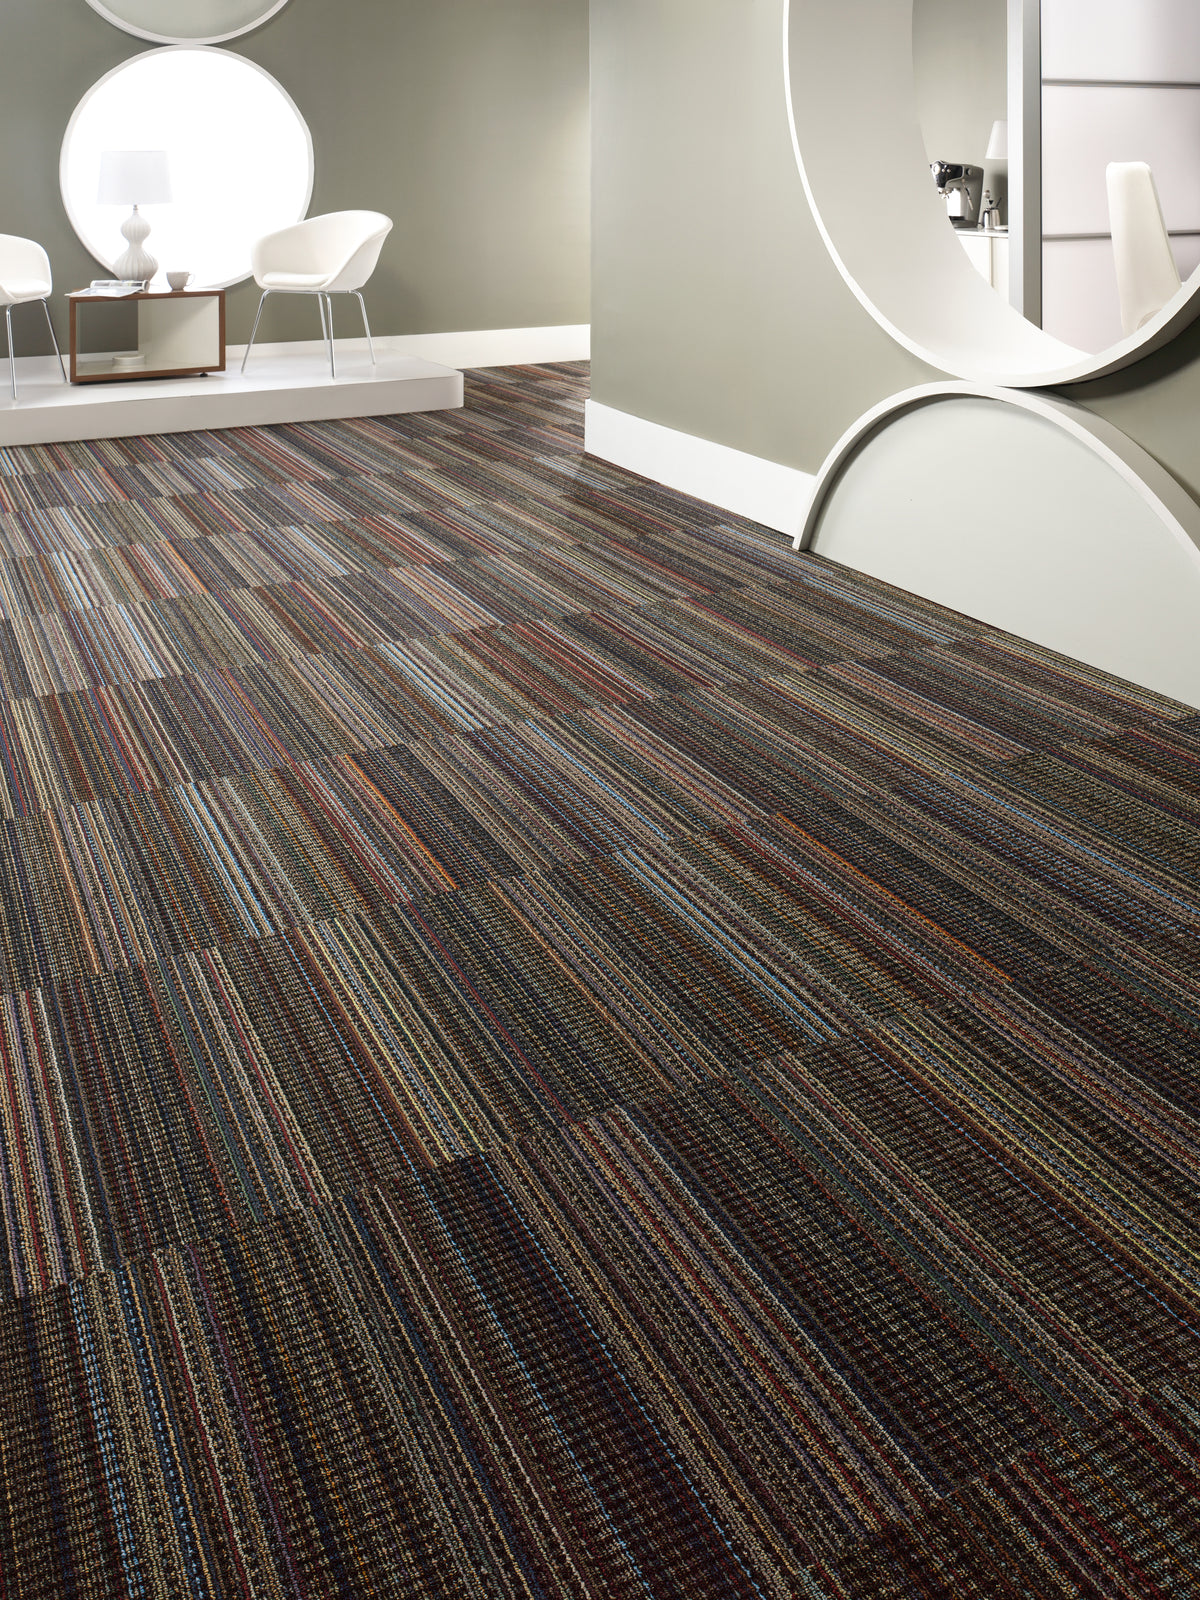 Mohawk Group - Mixology - Coolly Noted - Carpet Tile - Installed